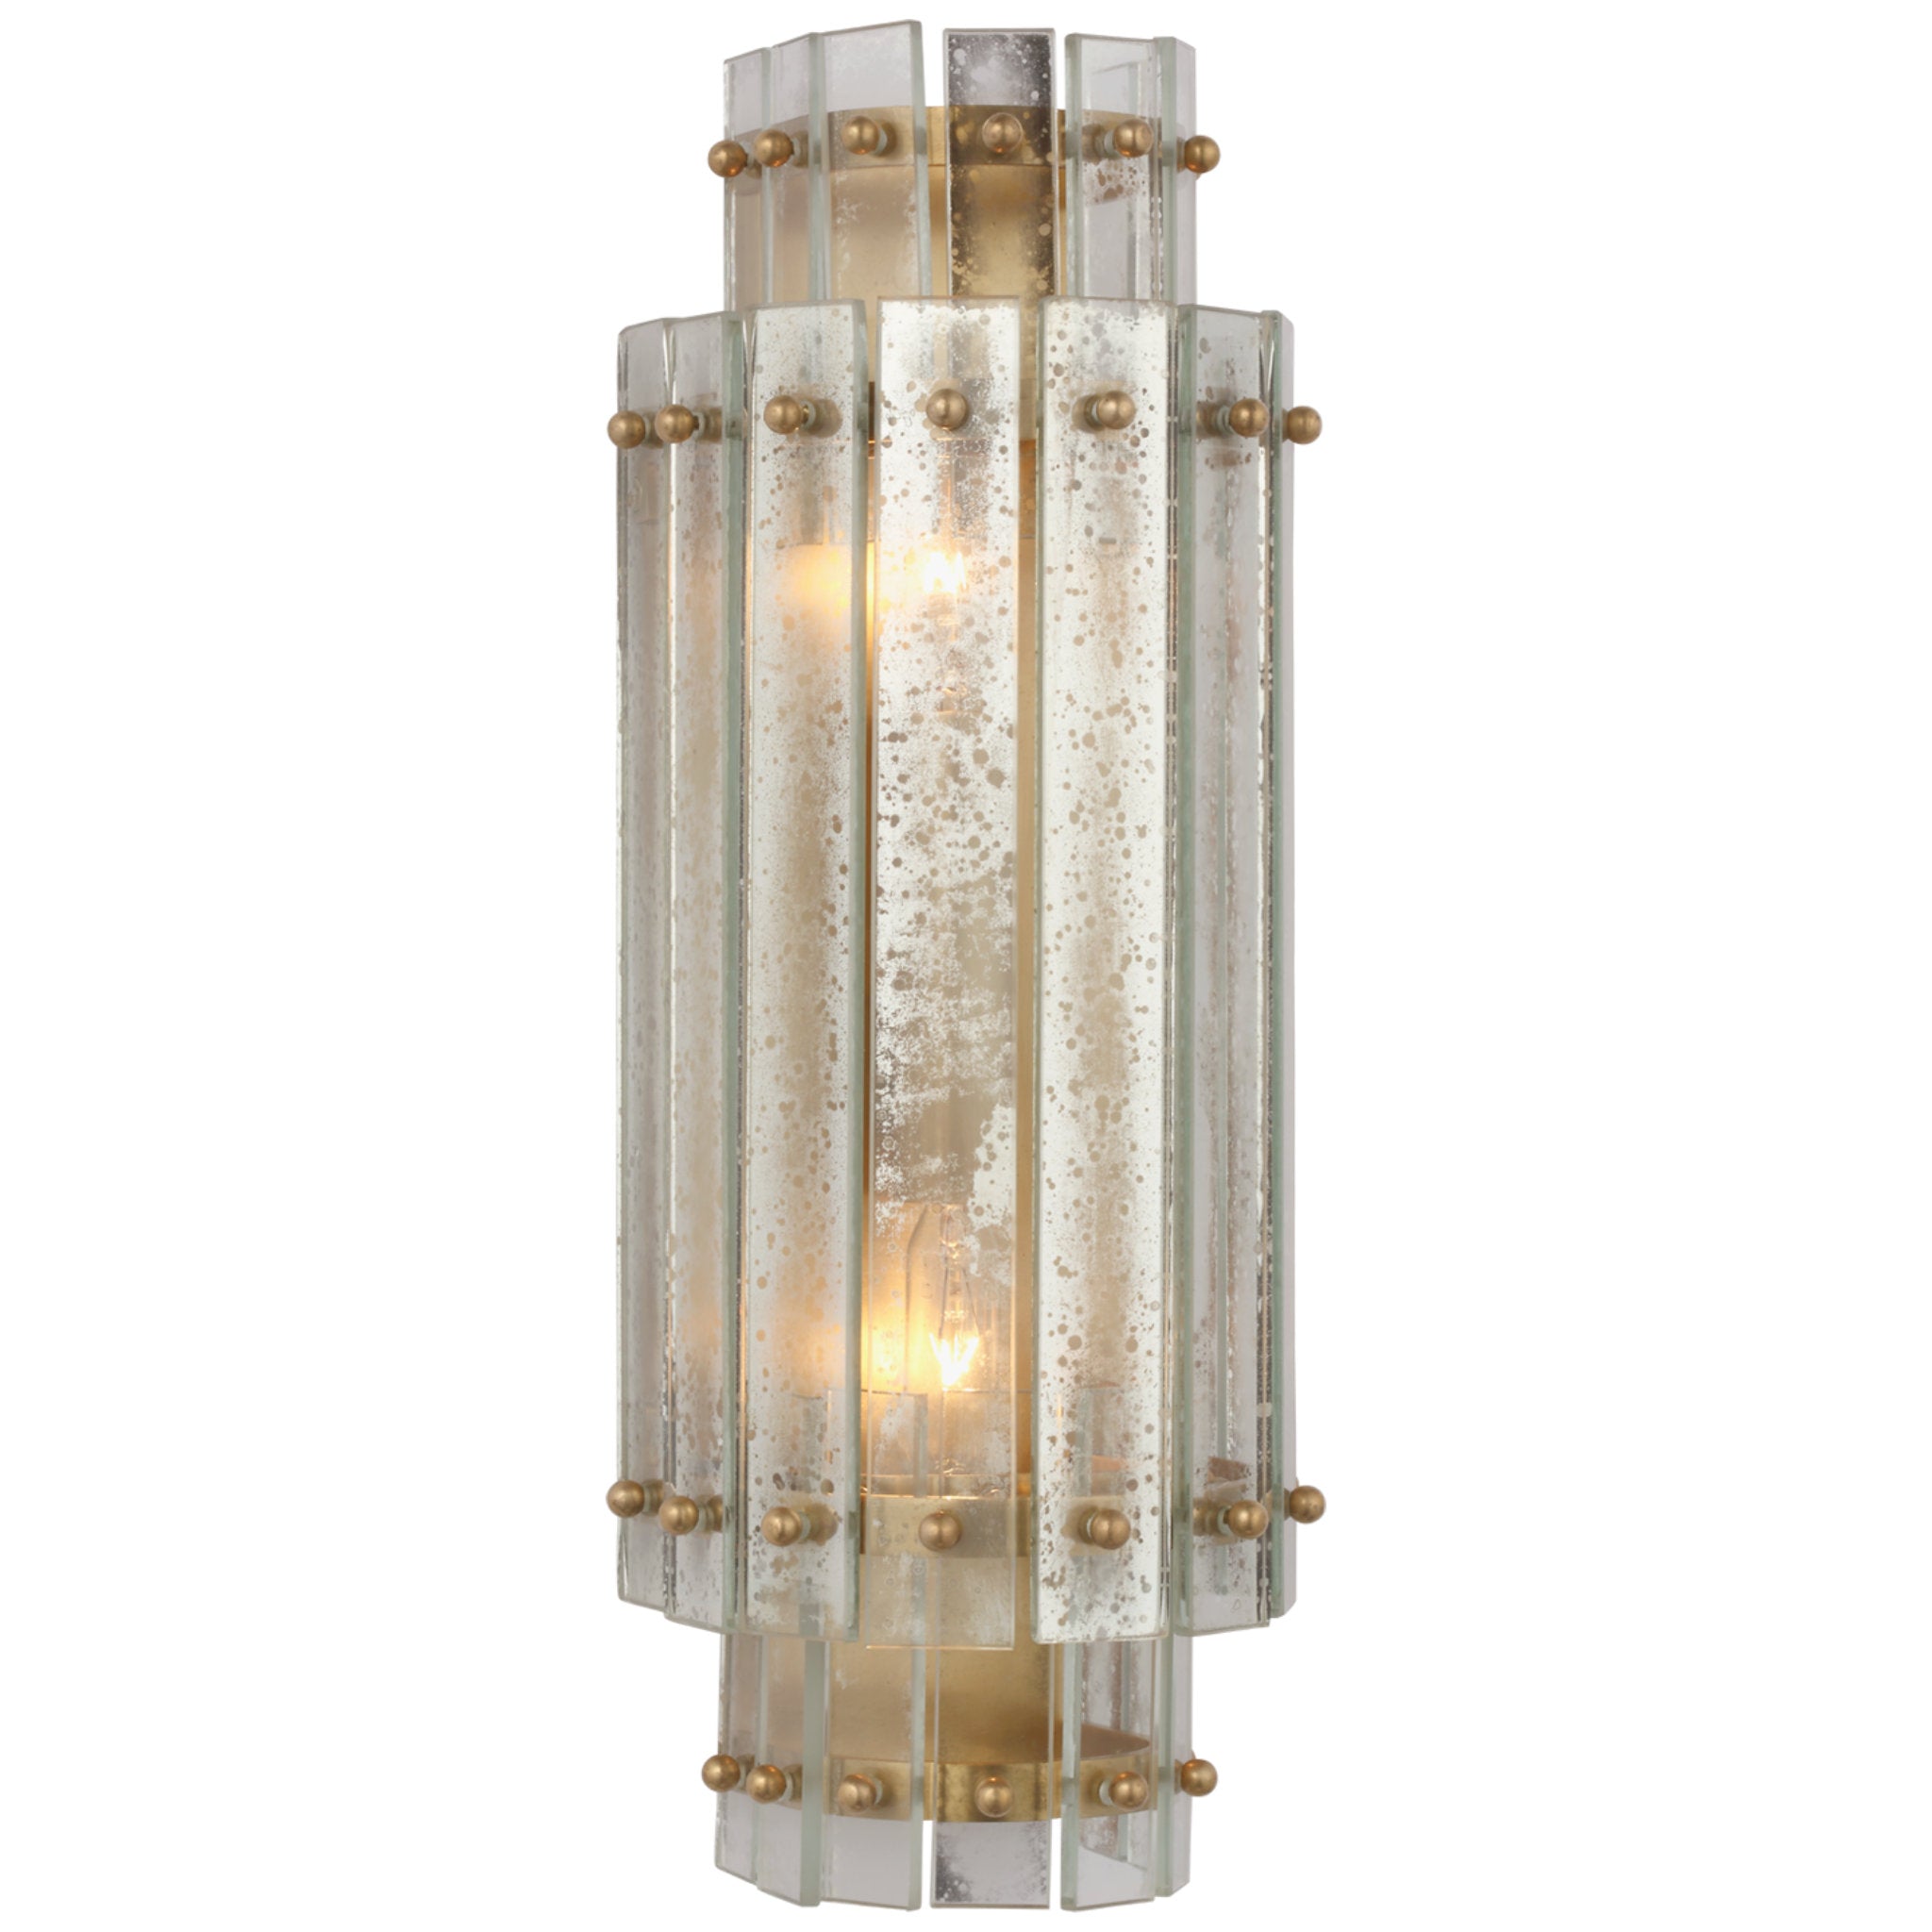 Carrier and Company Cadence Small Tiered Sconce in Hand-Rubbed Antique Brass with Antique Mirror